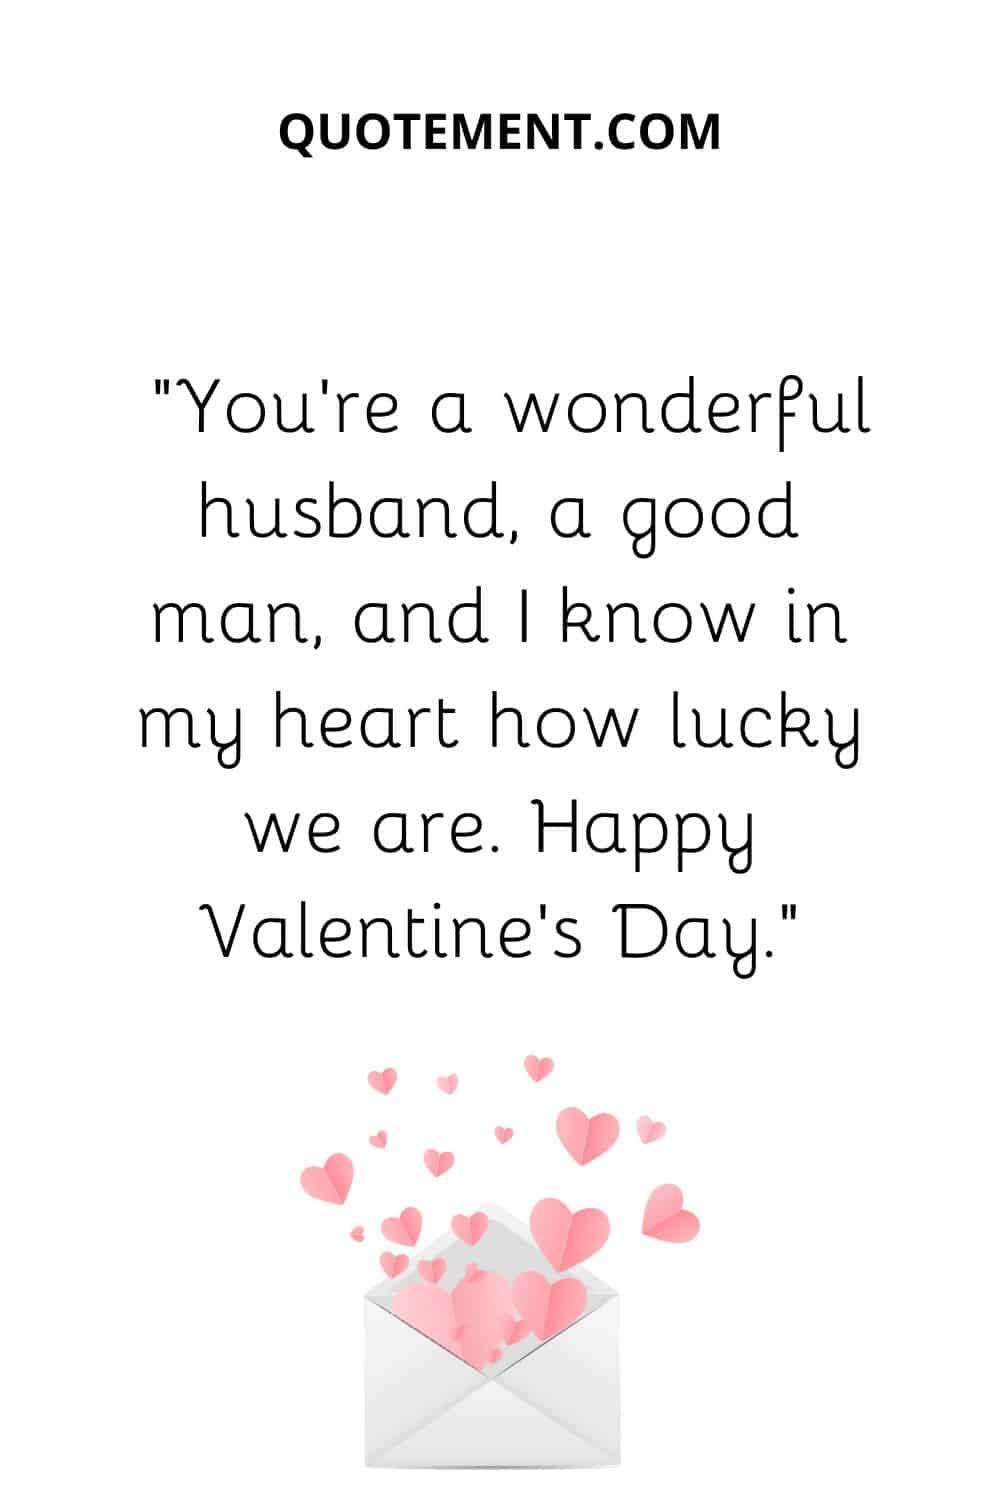 “You’re a wonderful husband, a good man, and I know in my heart how lucky we are. Happy Valentine’s Day.”